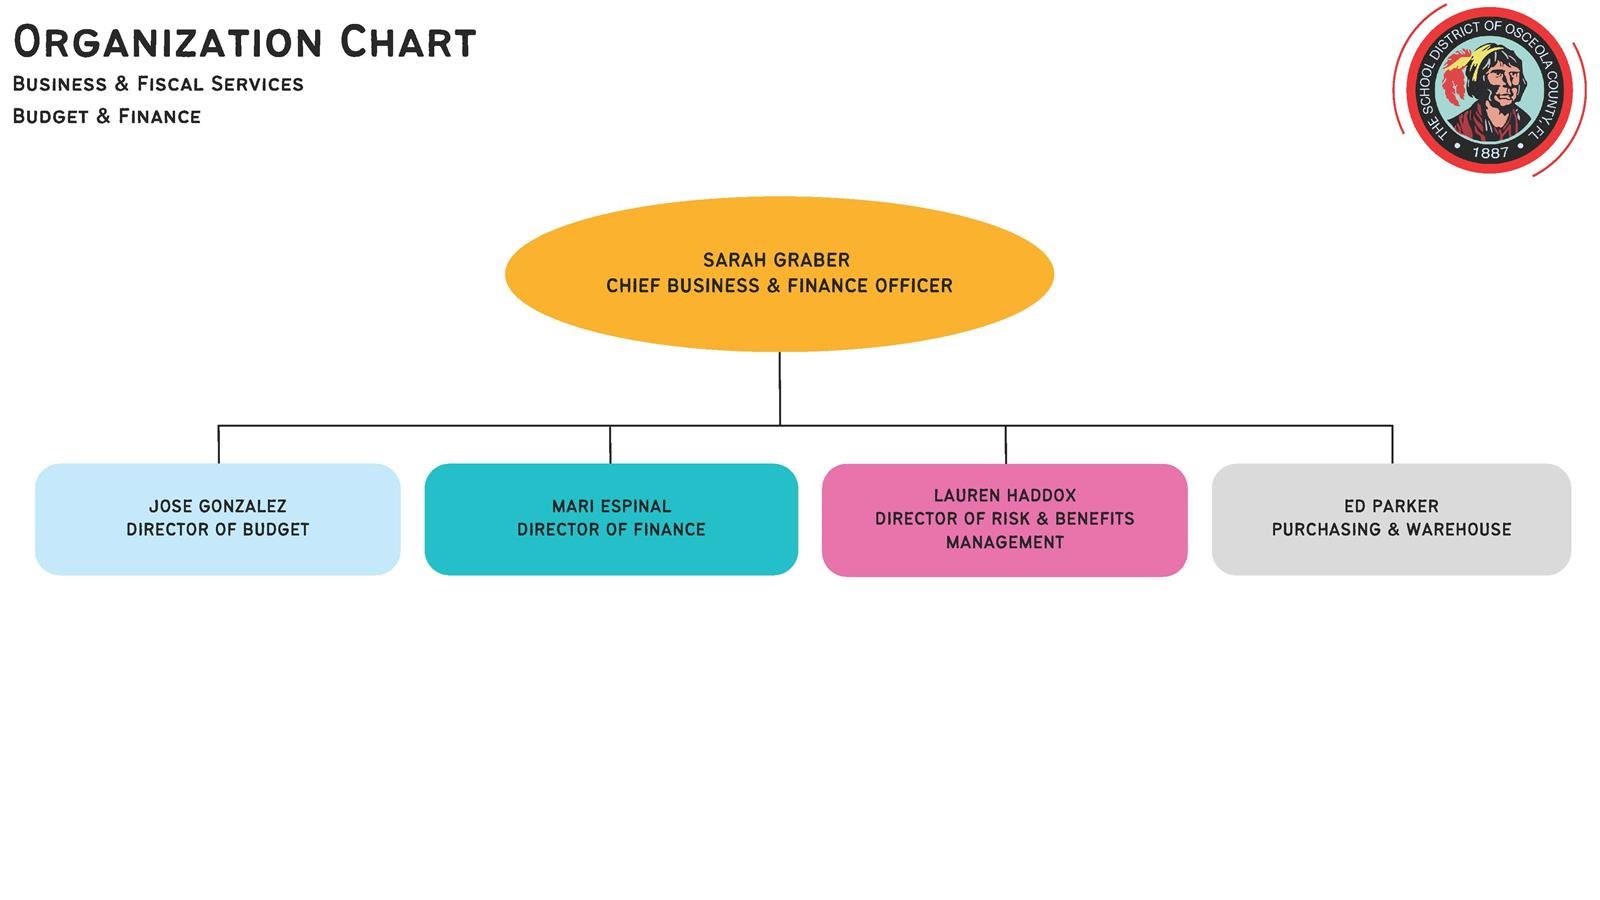 Business & Fiscal Services Org Chart